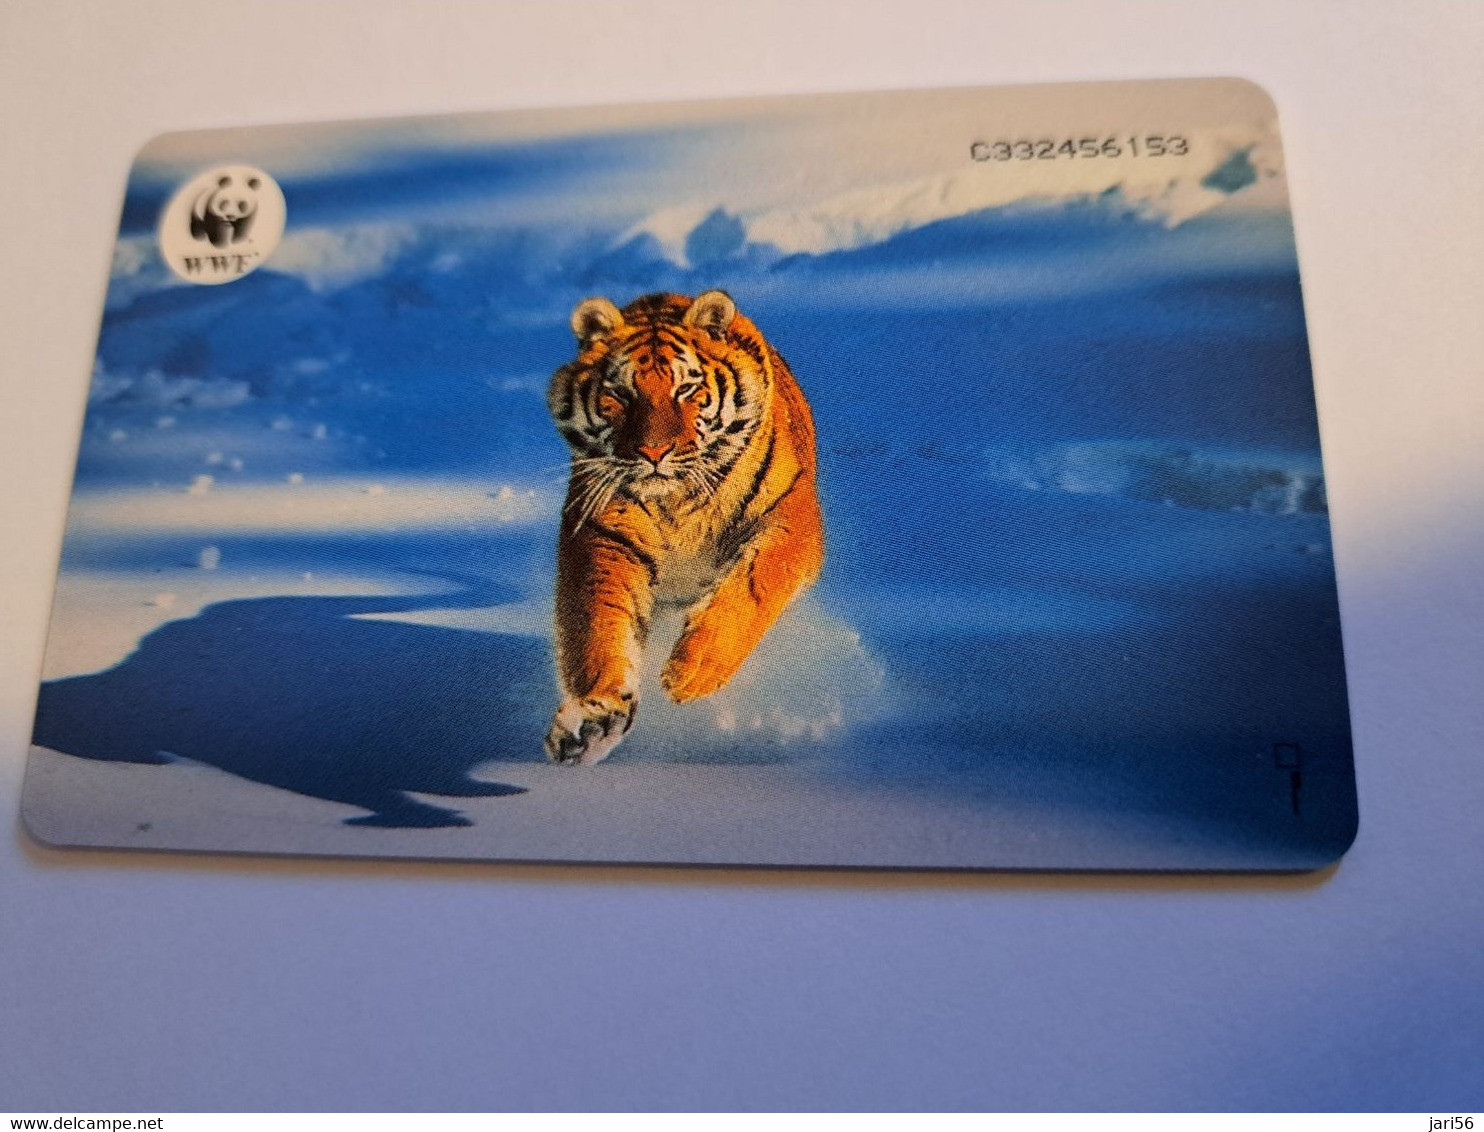 NETHERLANDS / WWF/WNF 1x TIGER/TIGRE  / CHIP ADVERTISING /DIFFICULT /  HFL 2,50 /CRD 531.01  MINT !!  ** 11987** - Privées